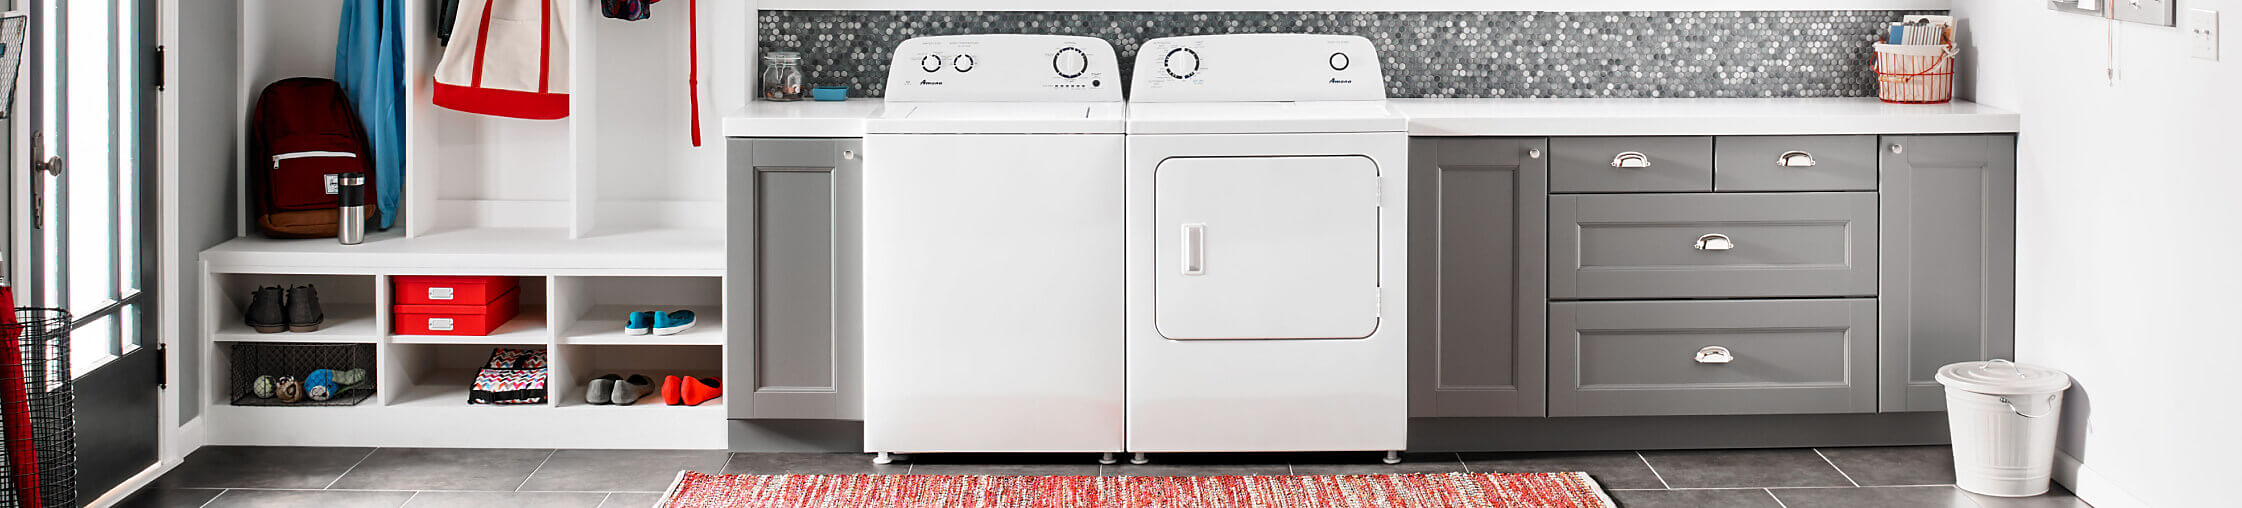 Amana® washer and dryer pair in laundry room